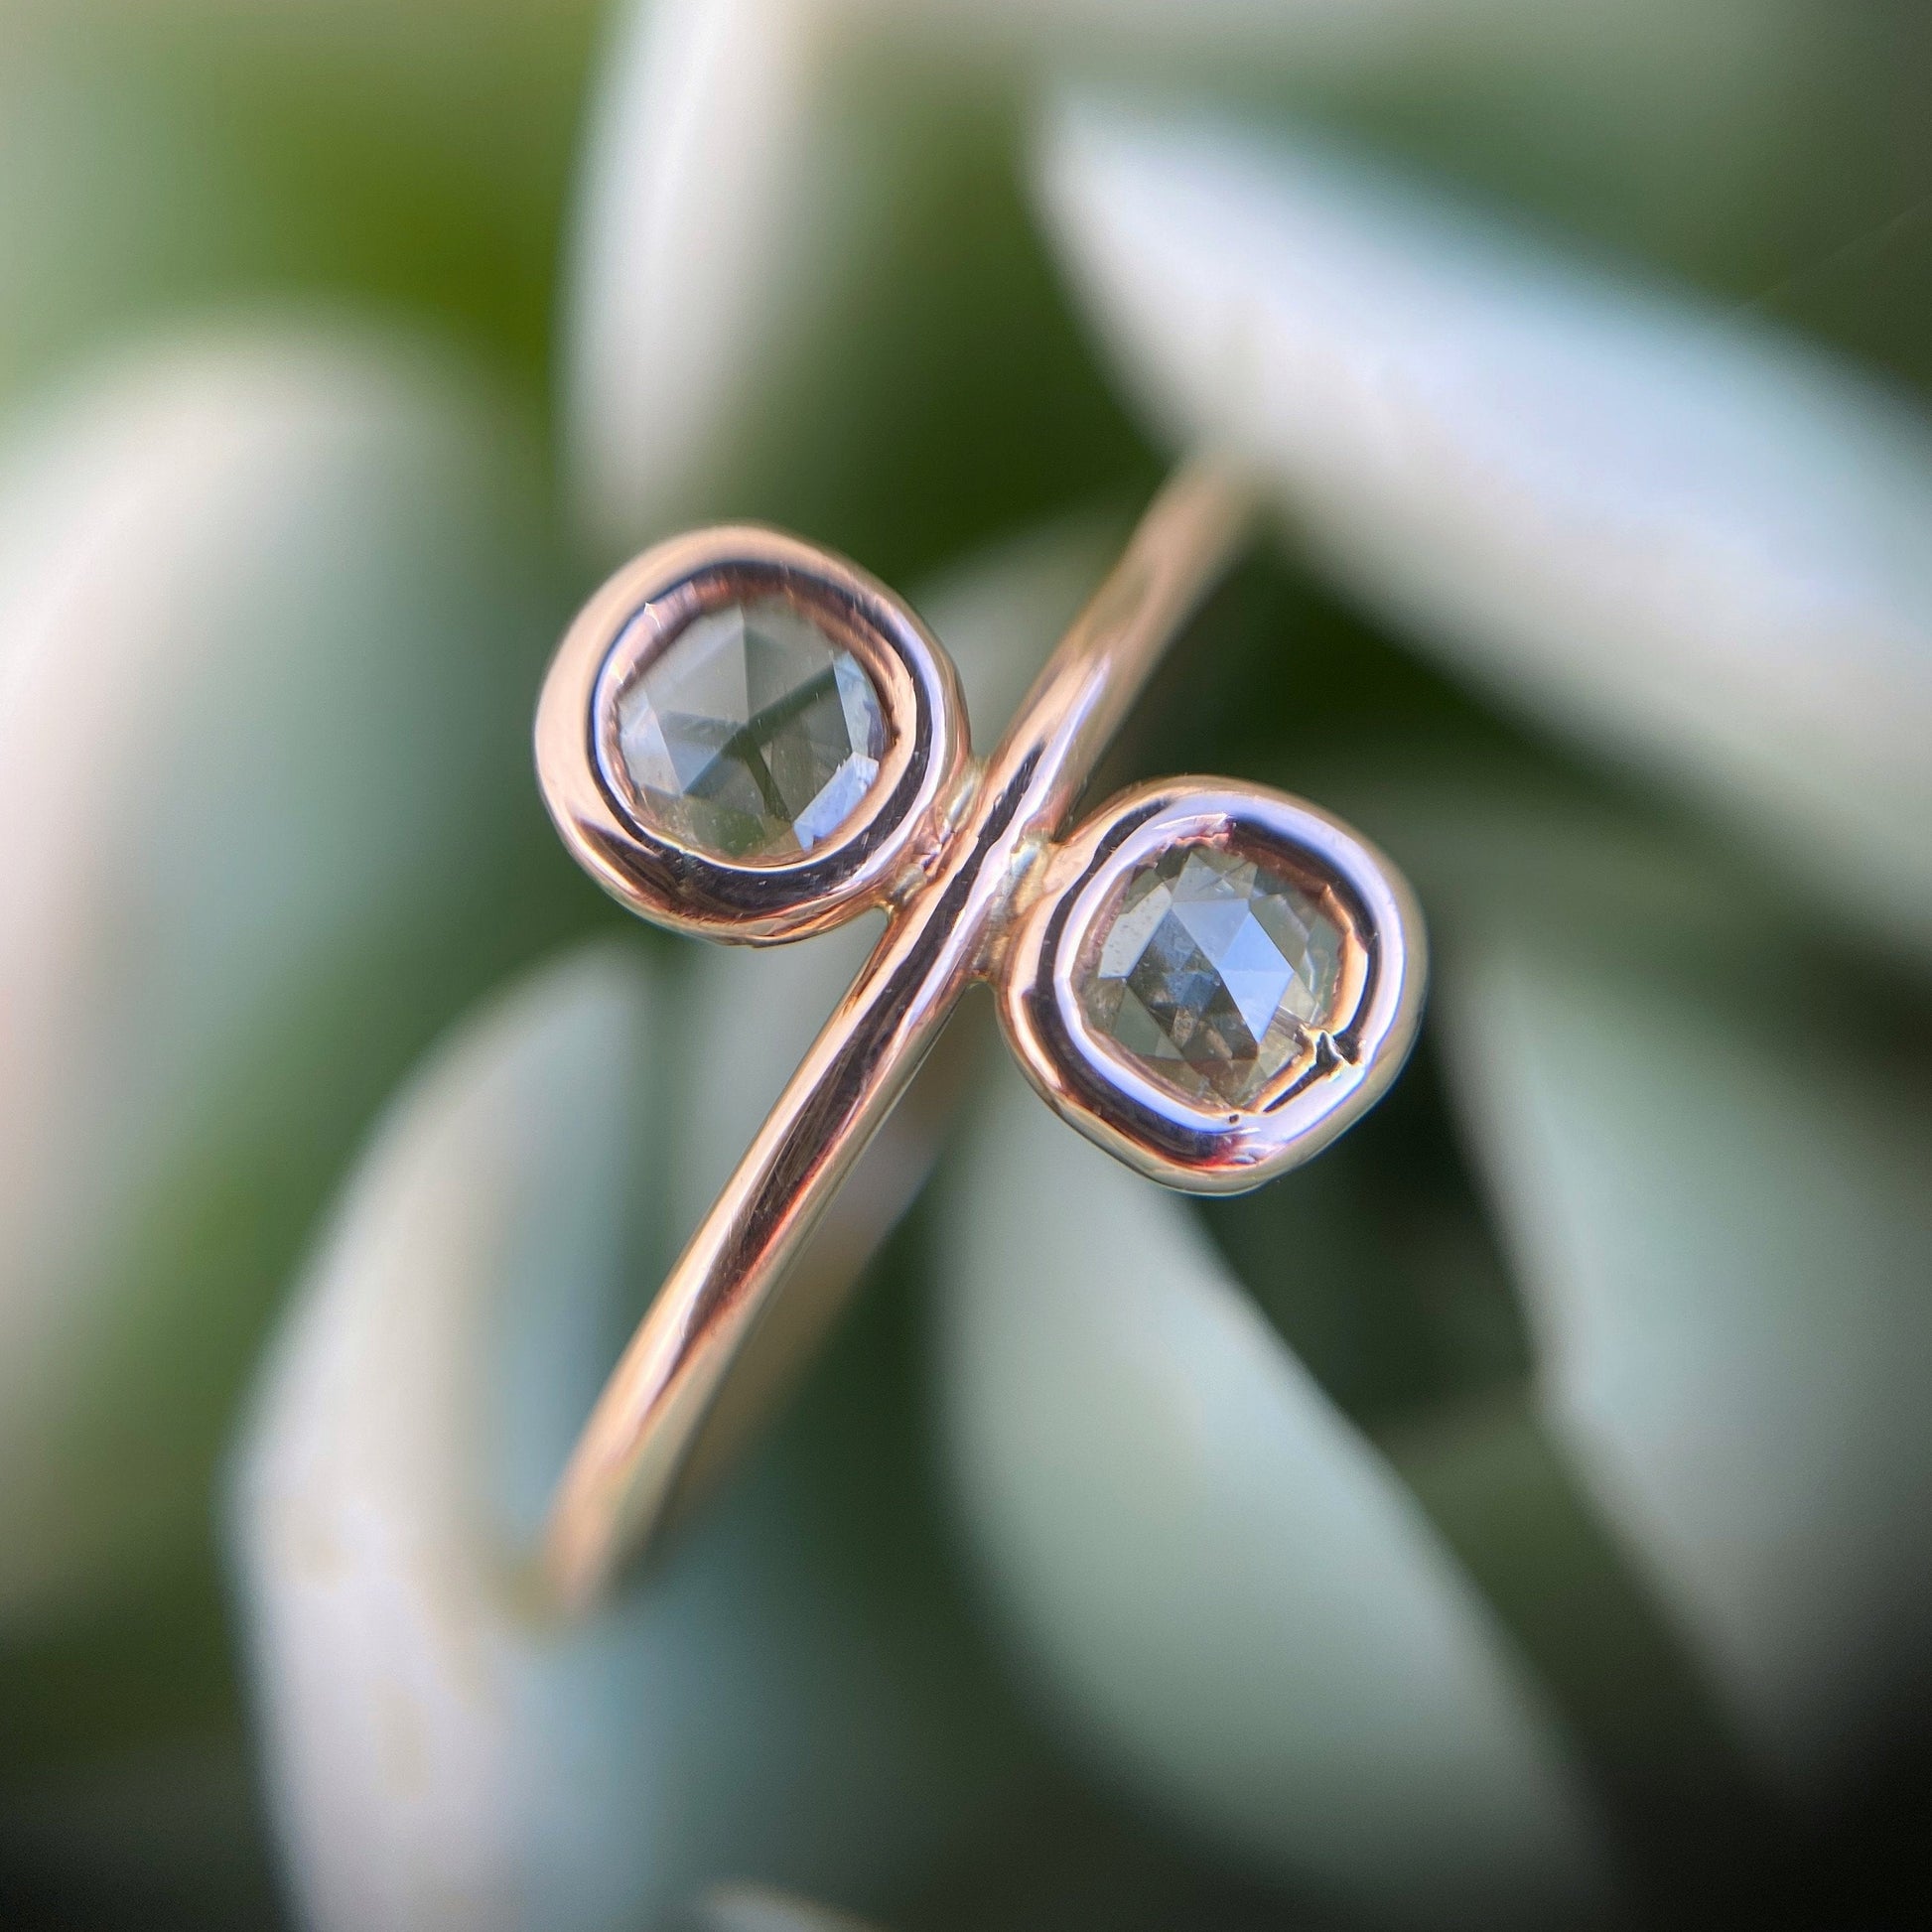 Paleo Double Diamond Slice Rose Gold Ring close up against a succulent